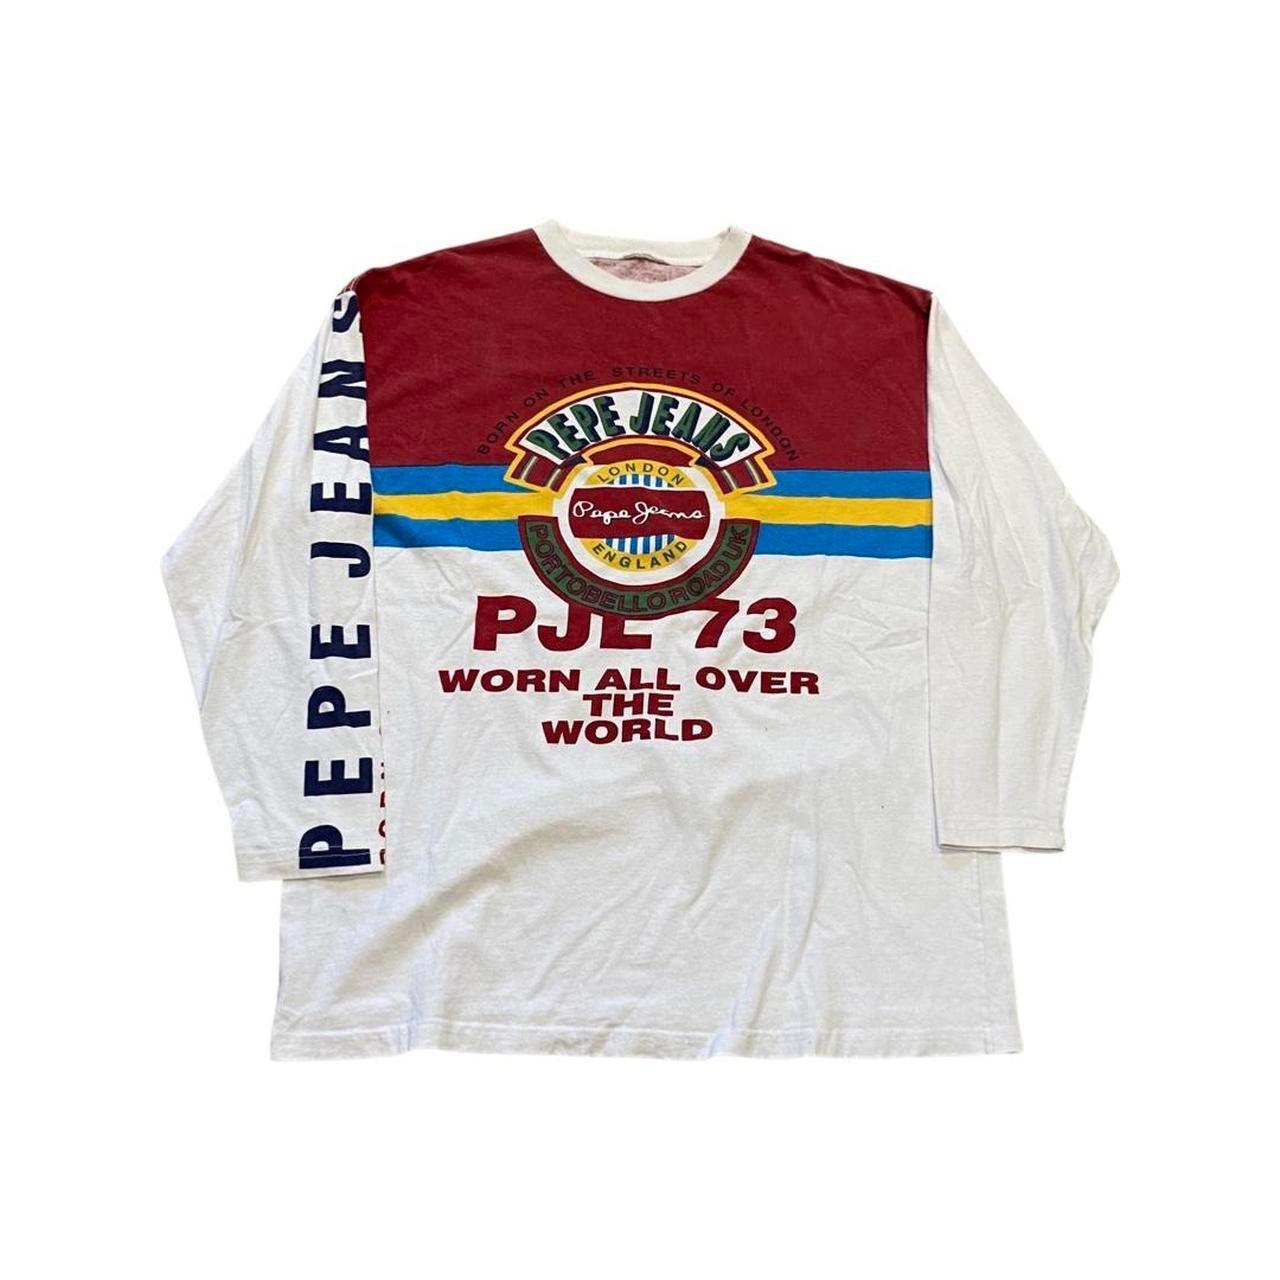 Product Image 1 - VINTAGE PEPE JEANS TEE

-90s
-MADE IN